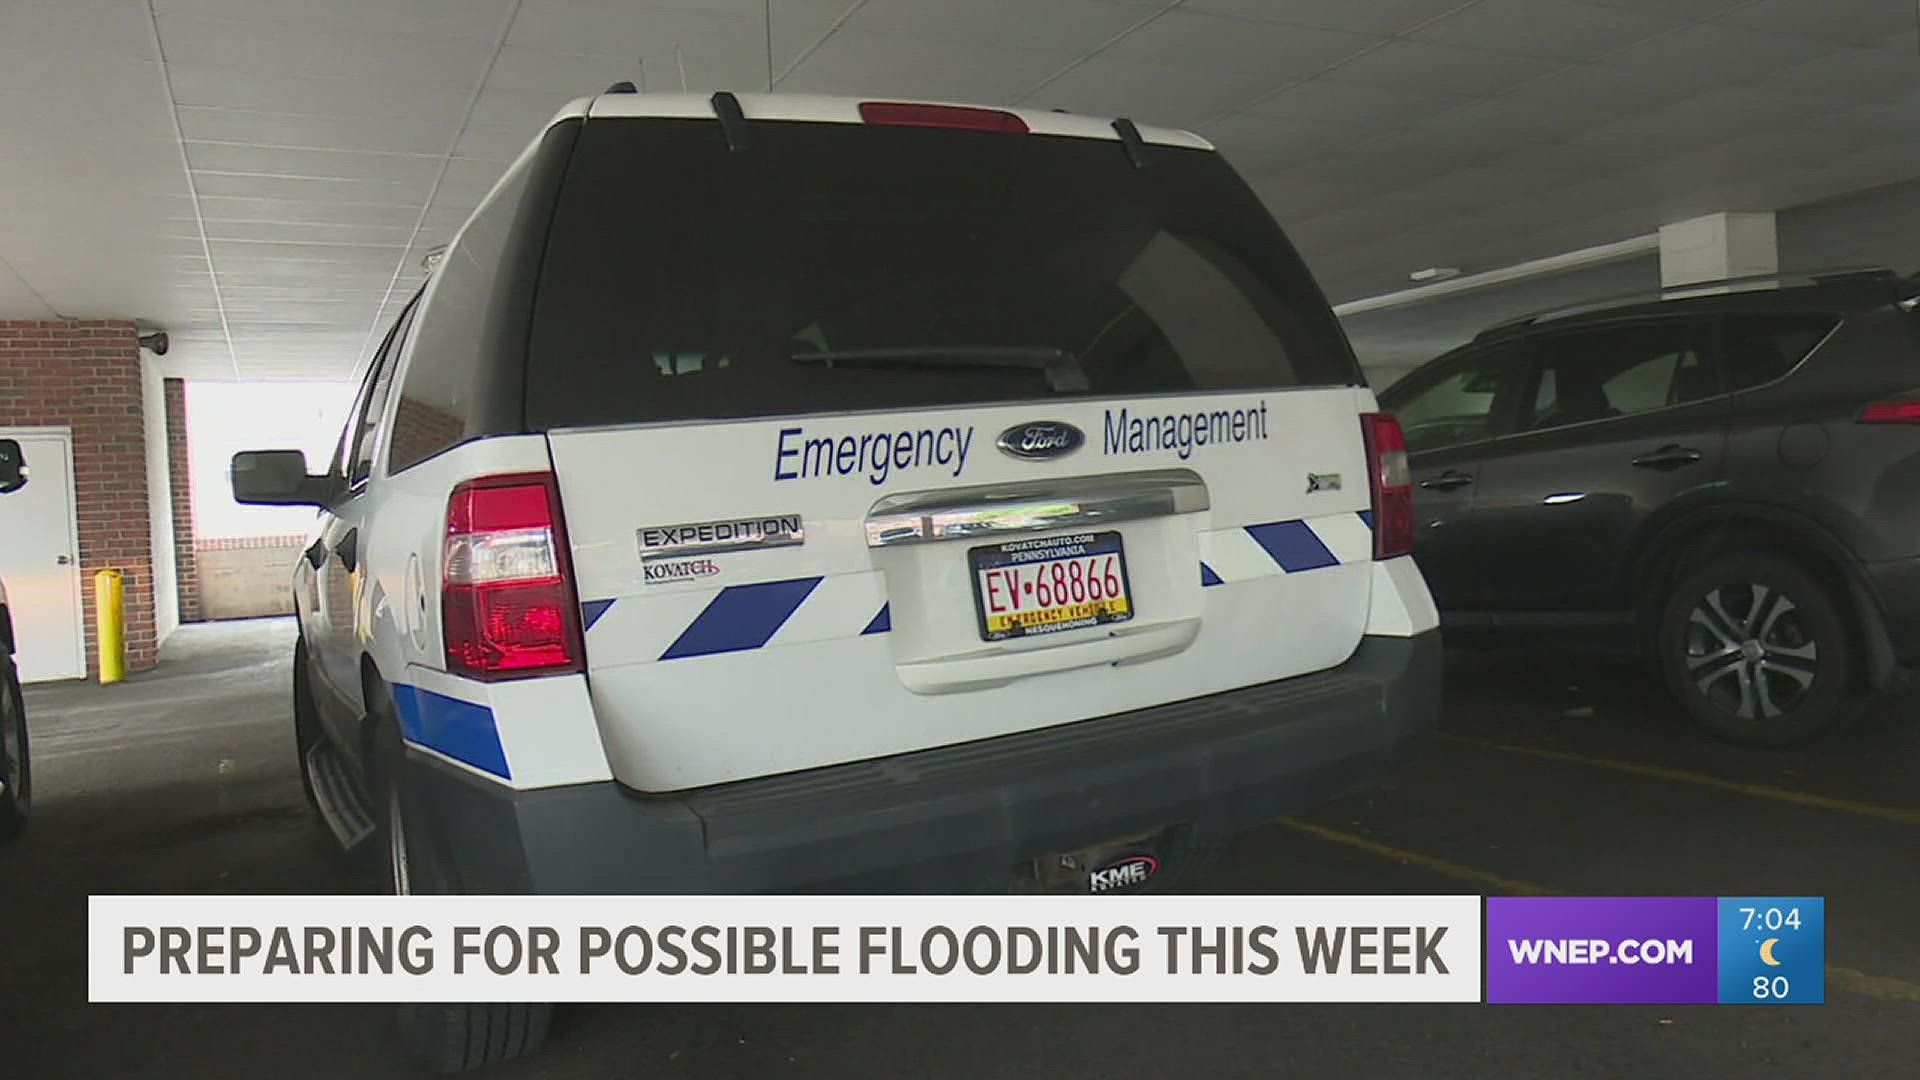 Parts of our area are bracing for heavy rain this week from Hurricane Ida.